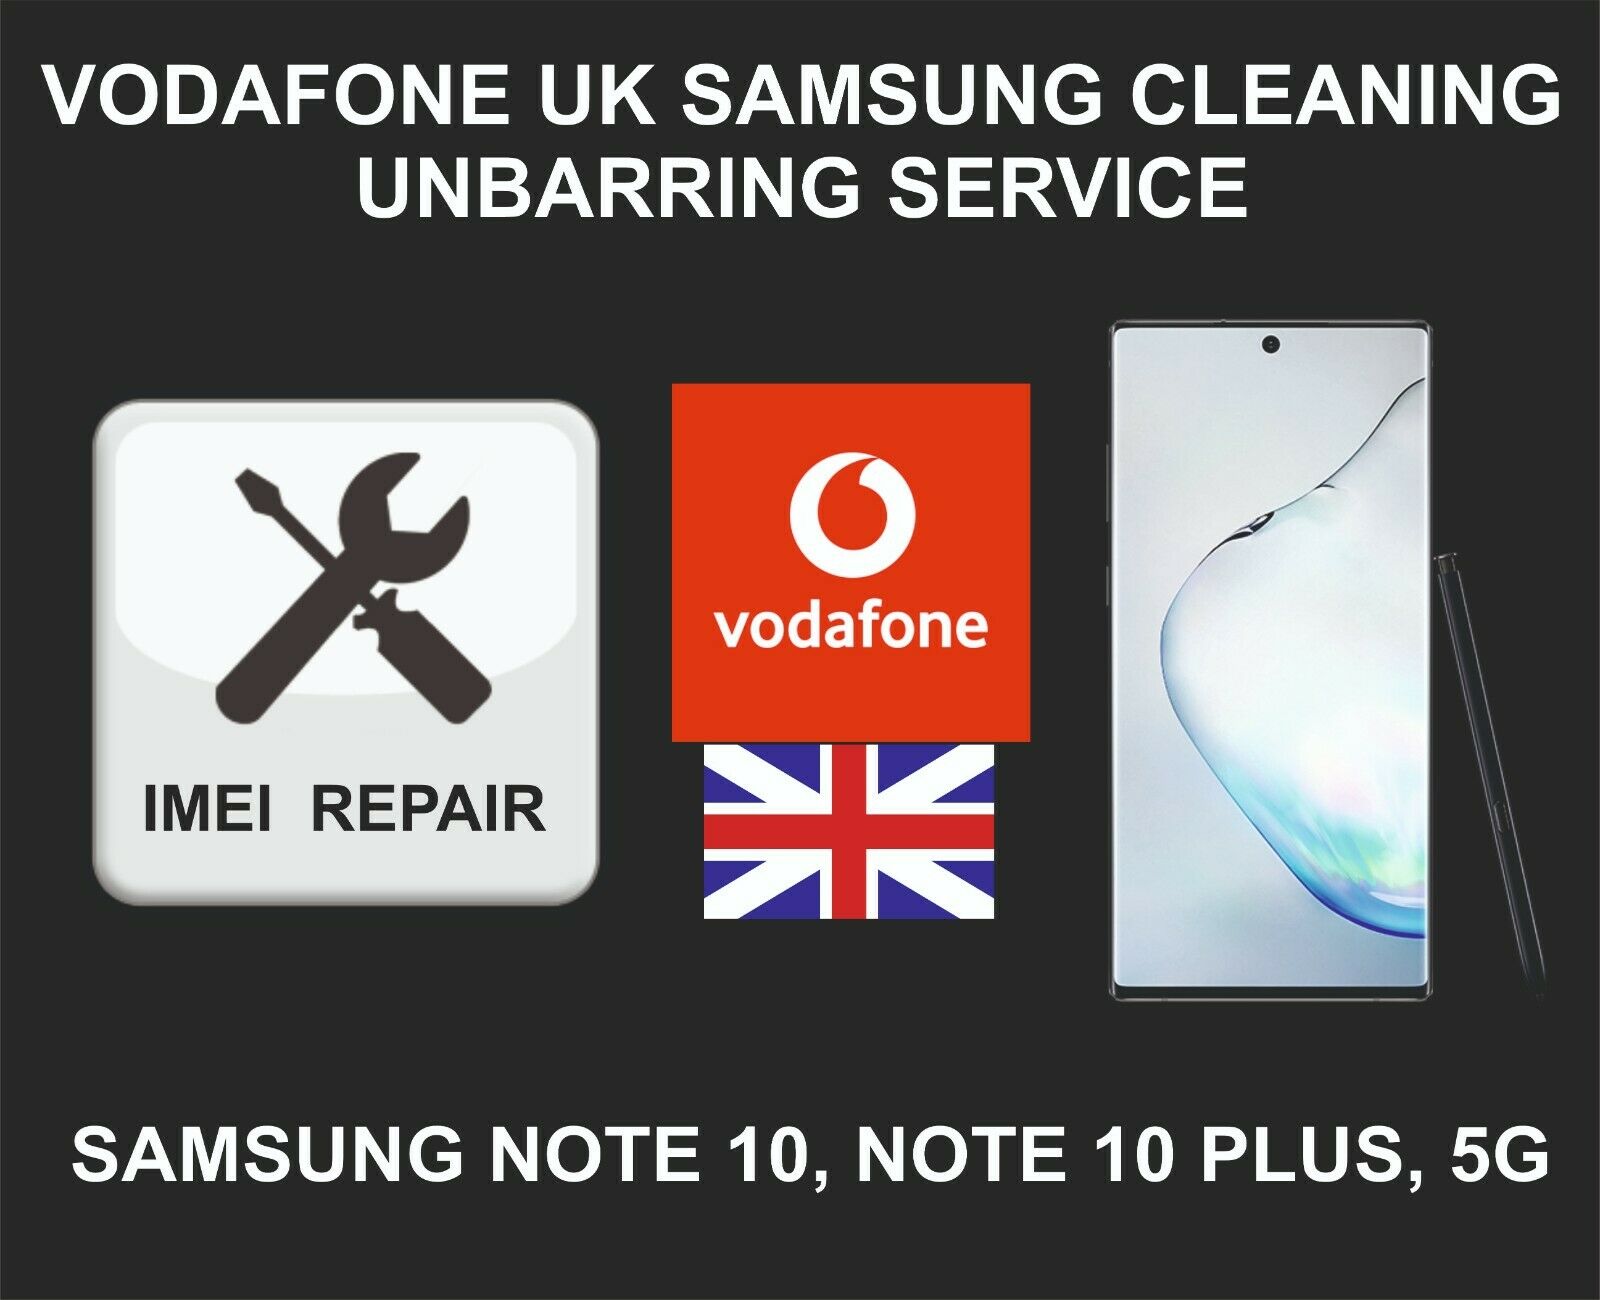 Vodafone UK Cleaning, Unbarring Service for Samsung Note 10, Note 10 Plus, 5G